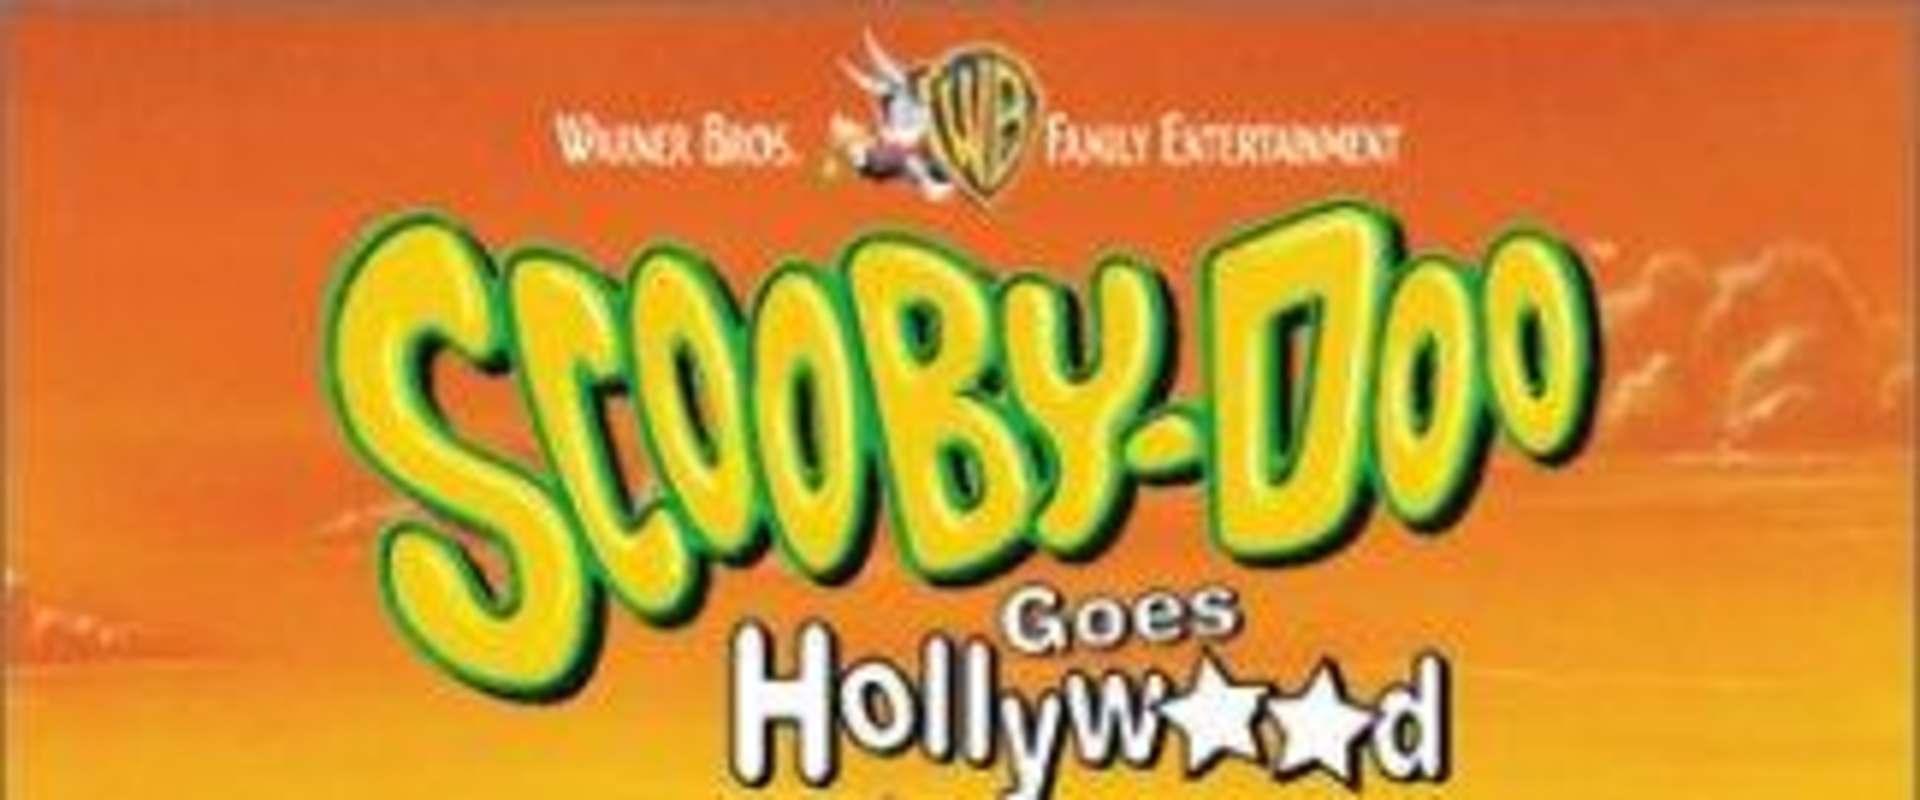 Scooby Goes Hollywood background 1